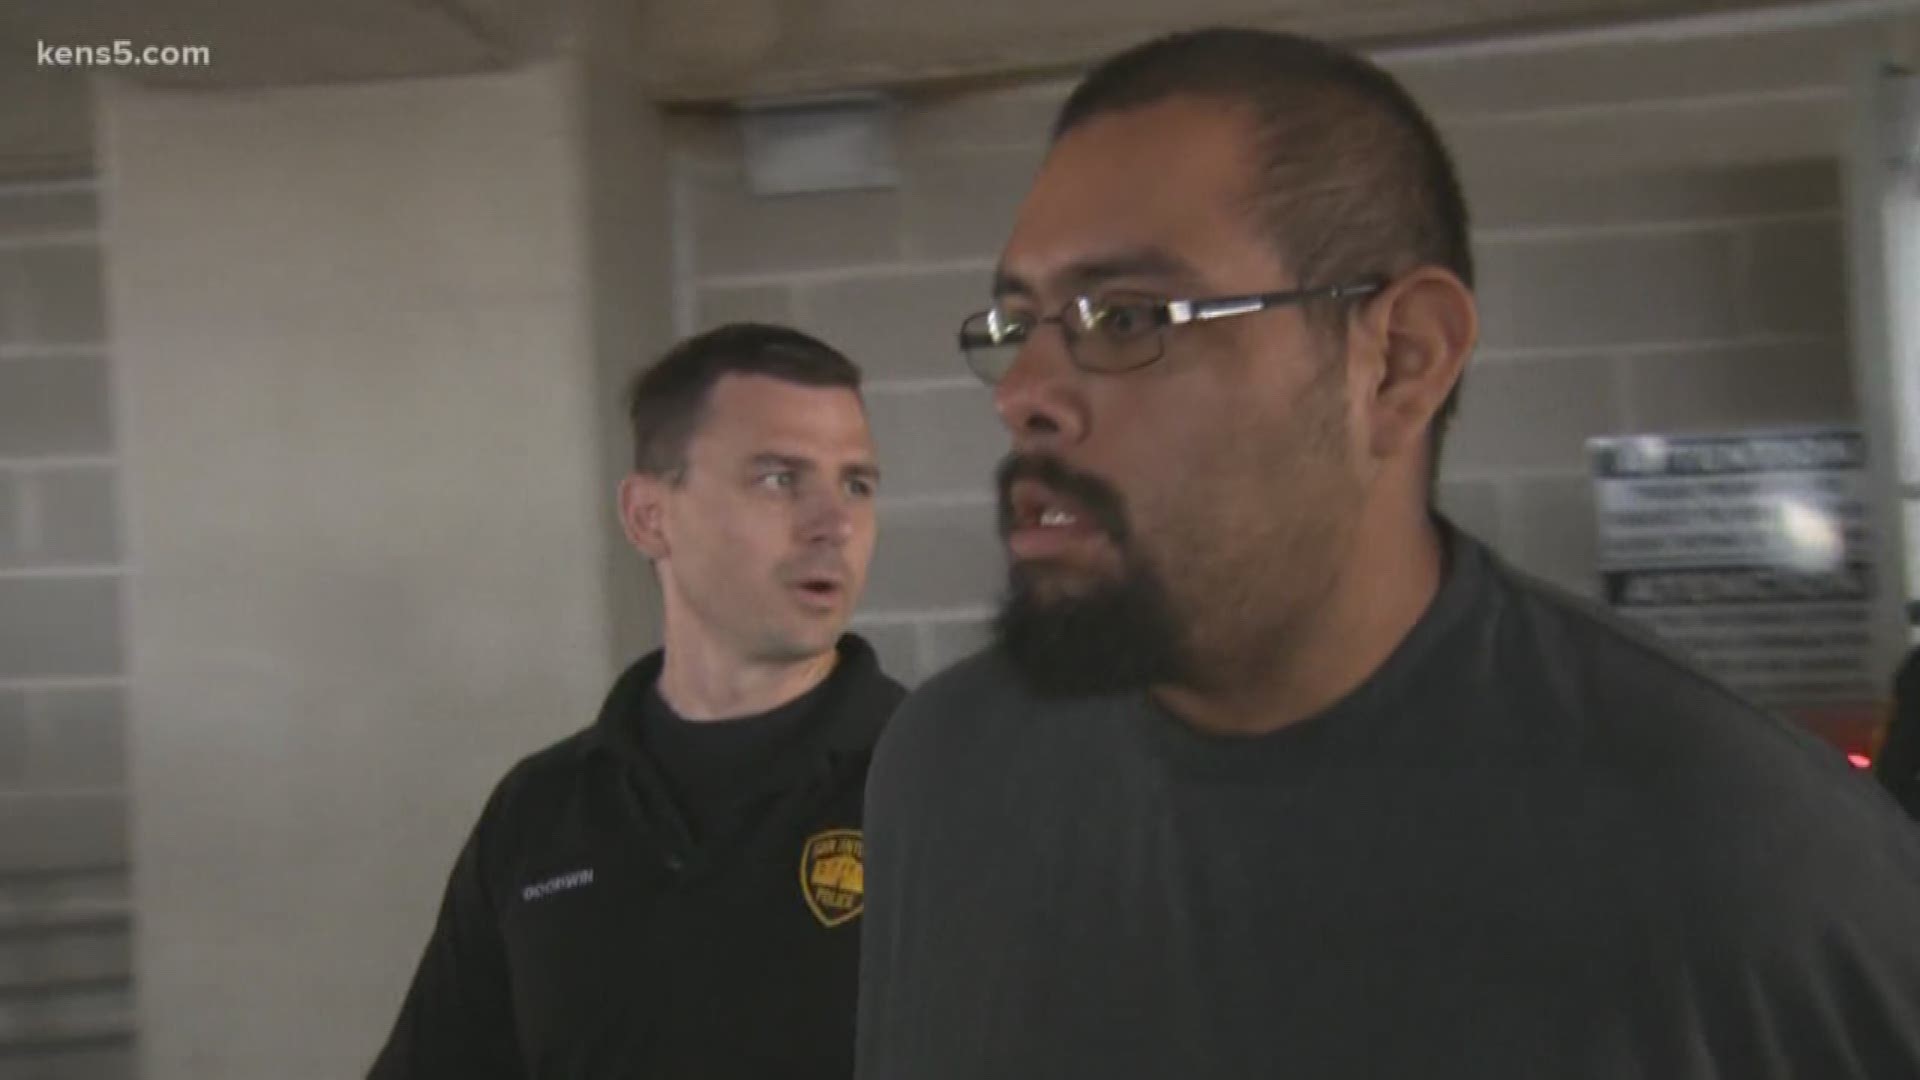 As Christopher Moreno, 37, got into the police car, he told reporters, "I'm innocent."